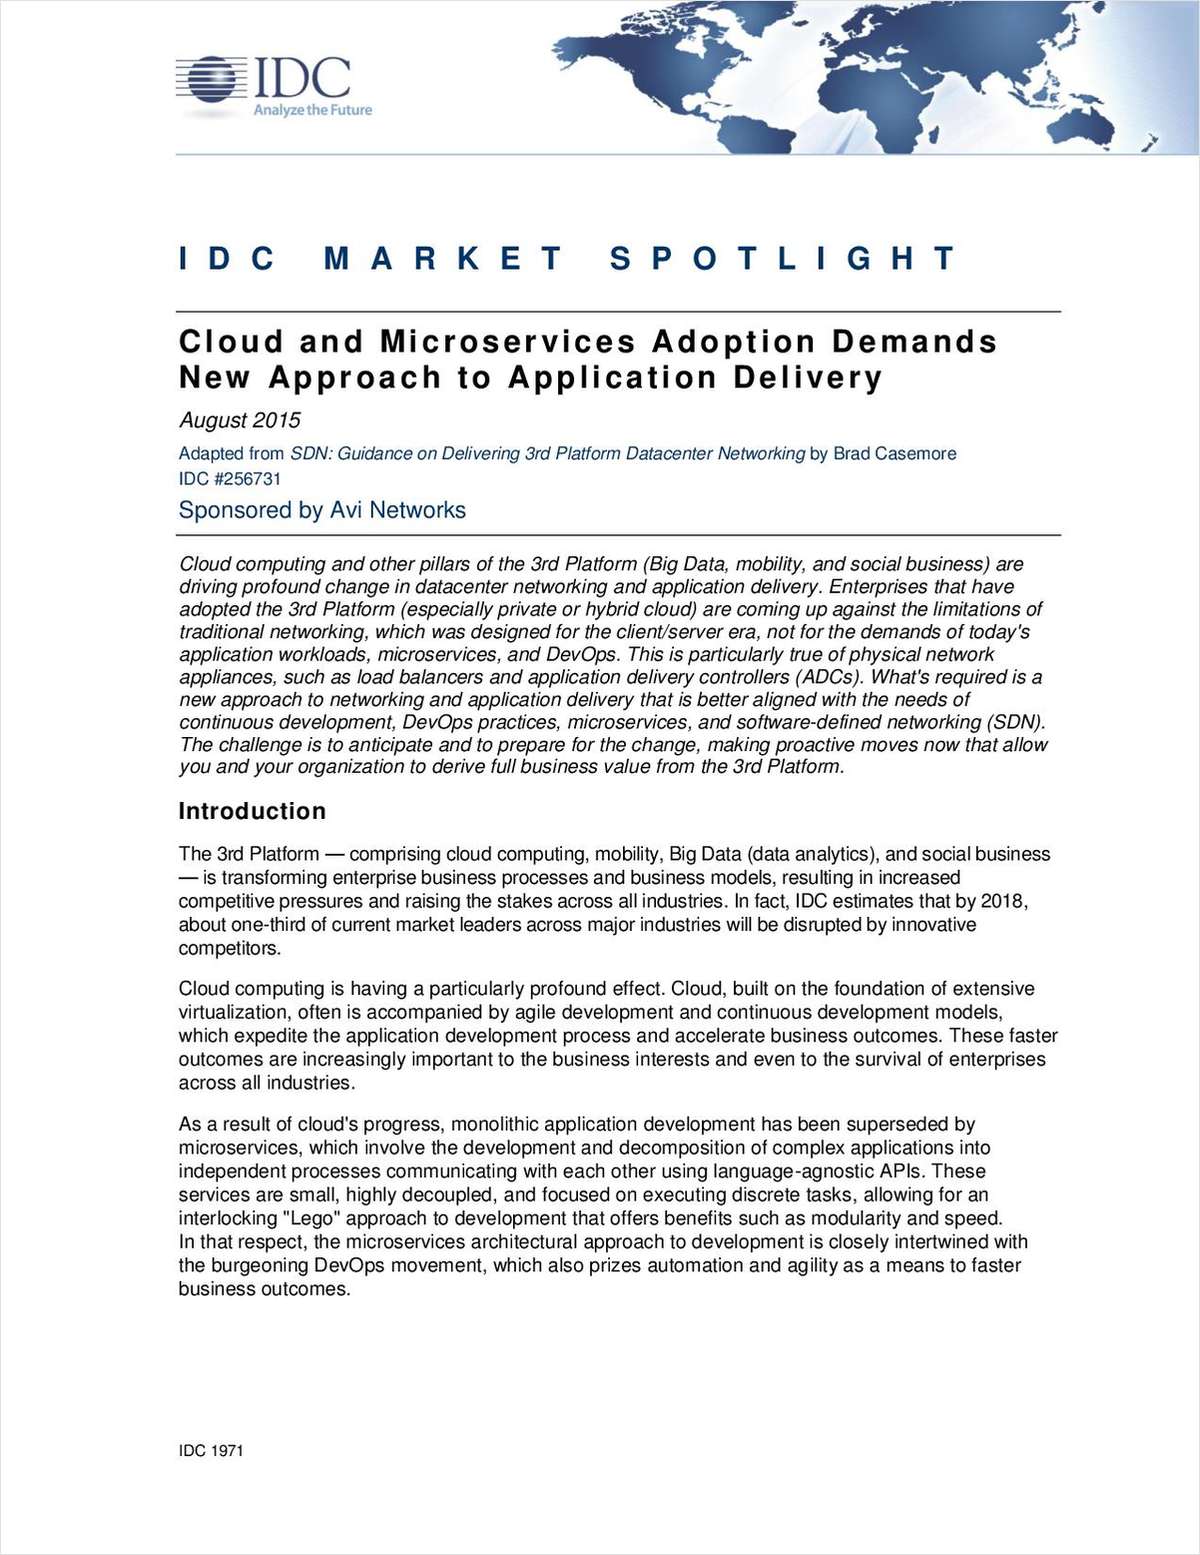 Cloud and Microservices Adoption Demands New Approach to Application Delivery